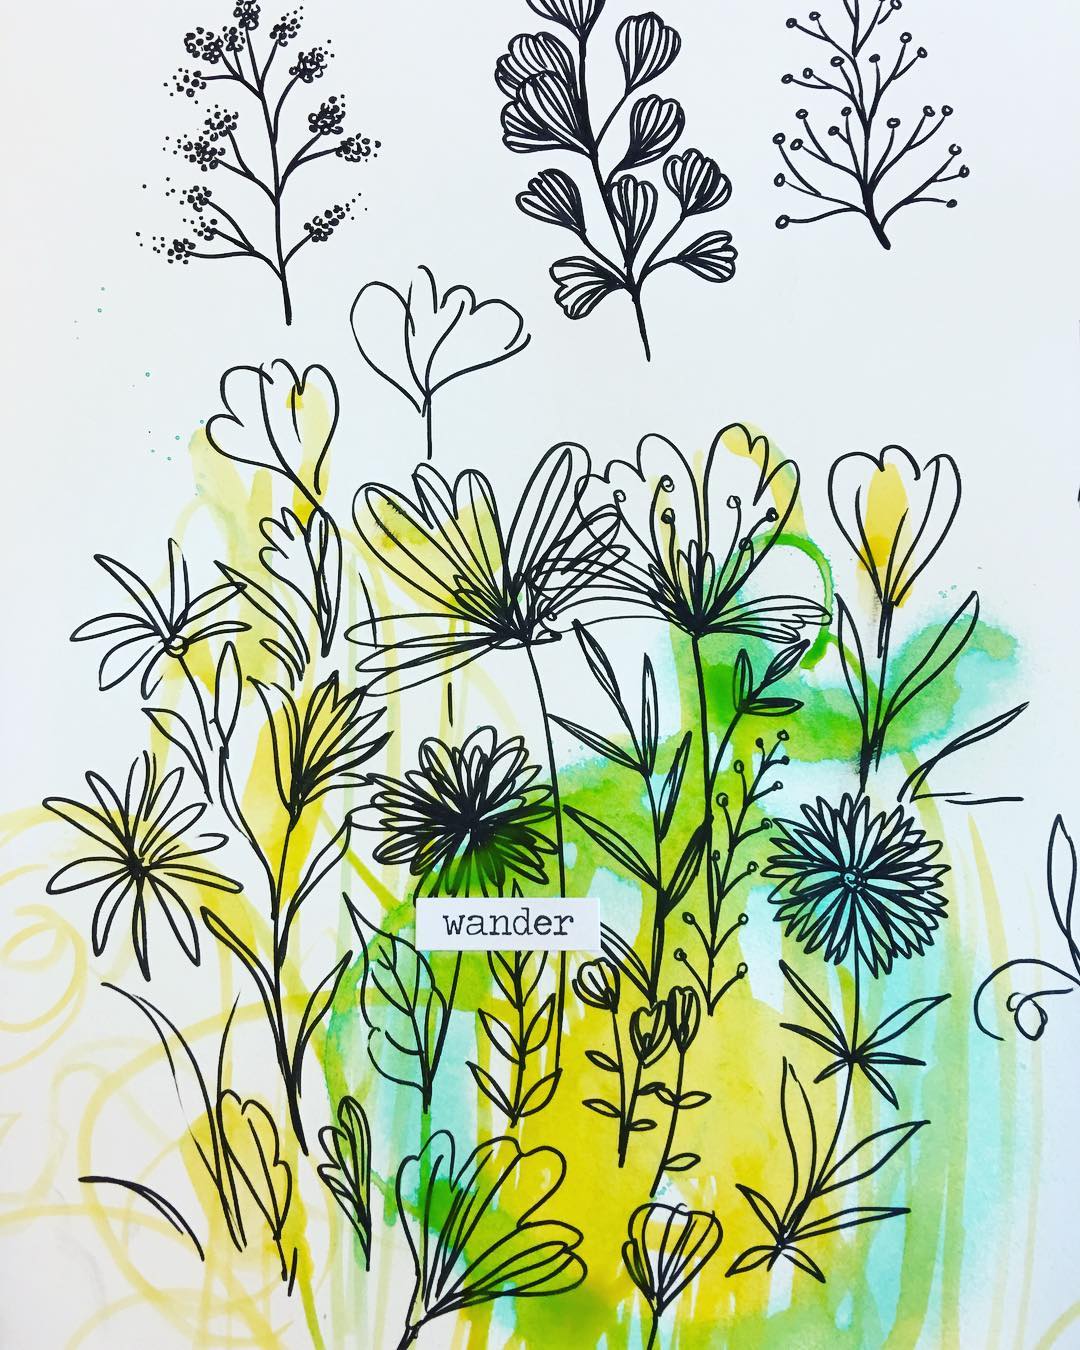 Daily Art Journaling ~ Day 330

Wander through the wilderness...Look at the wildflowers that always seem to somehow find their way through everything...